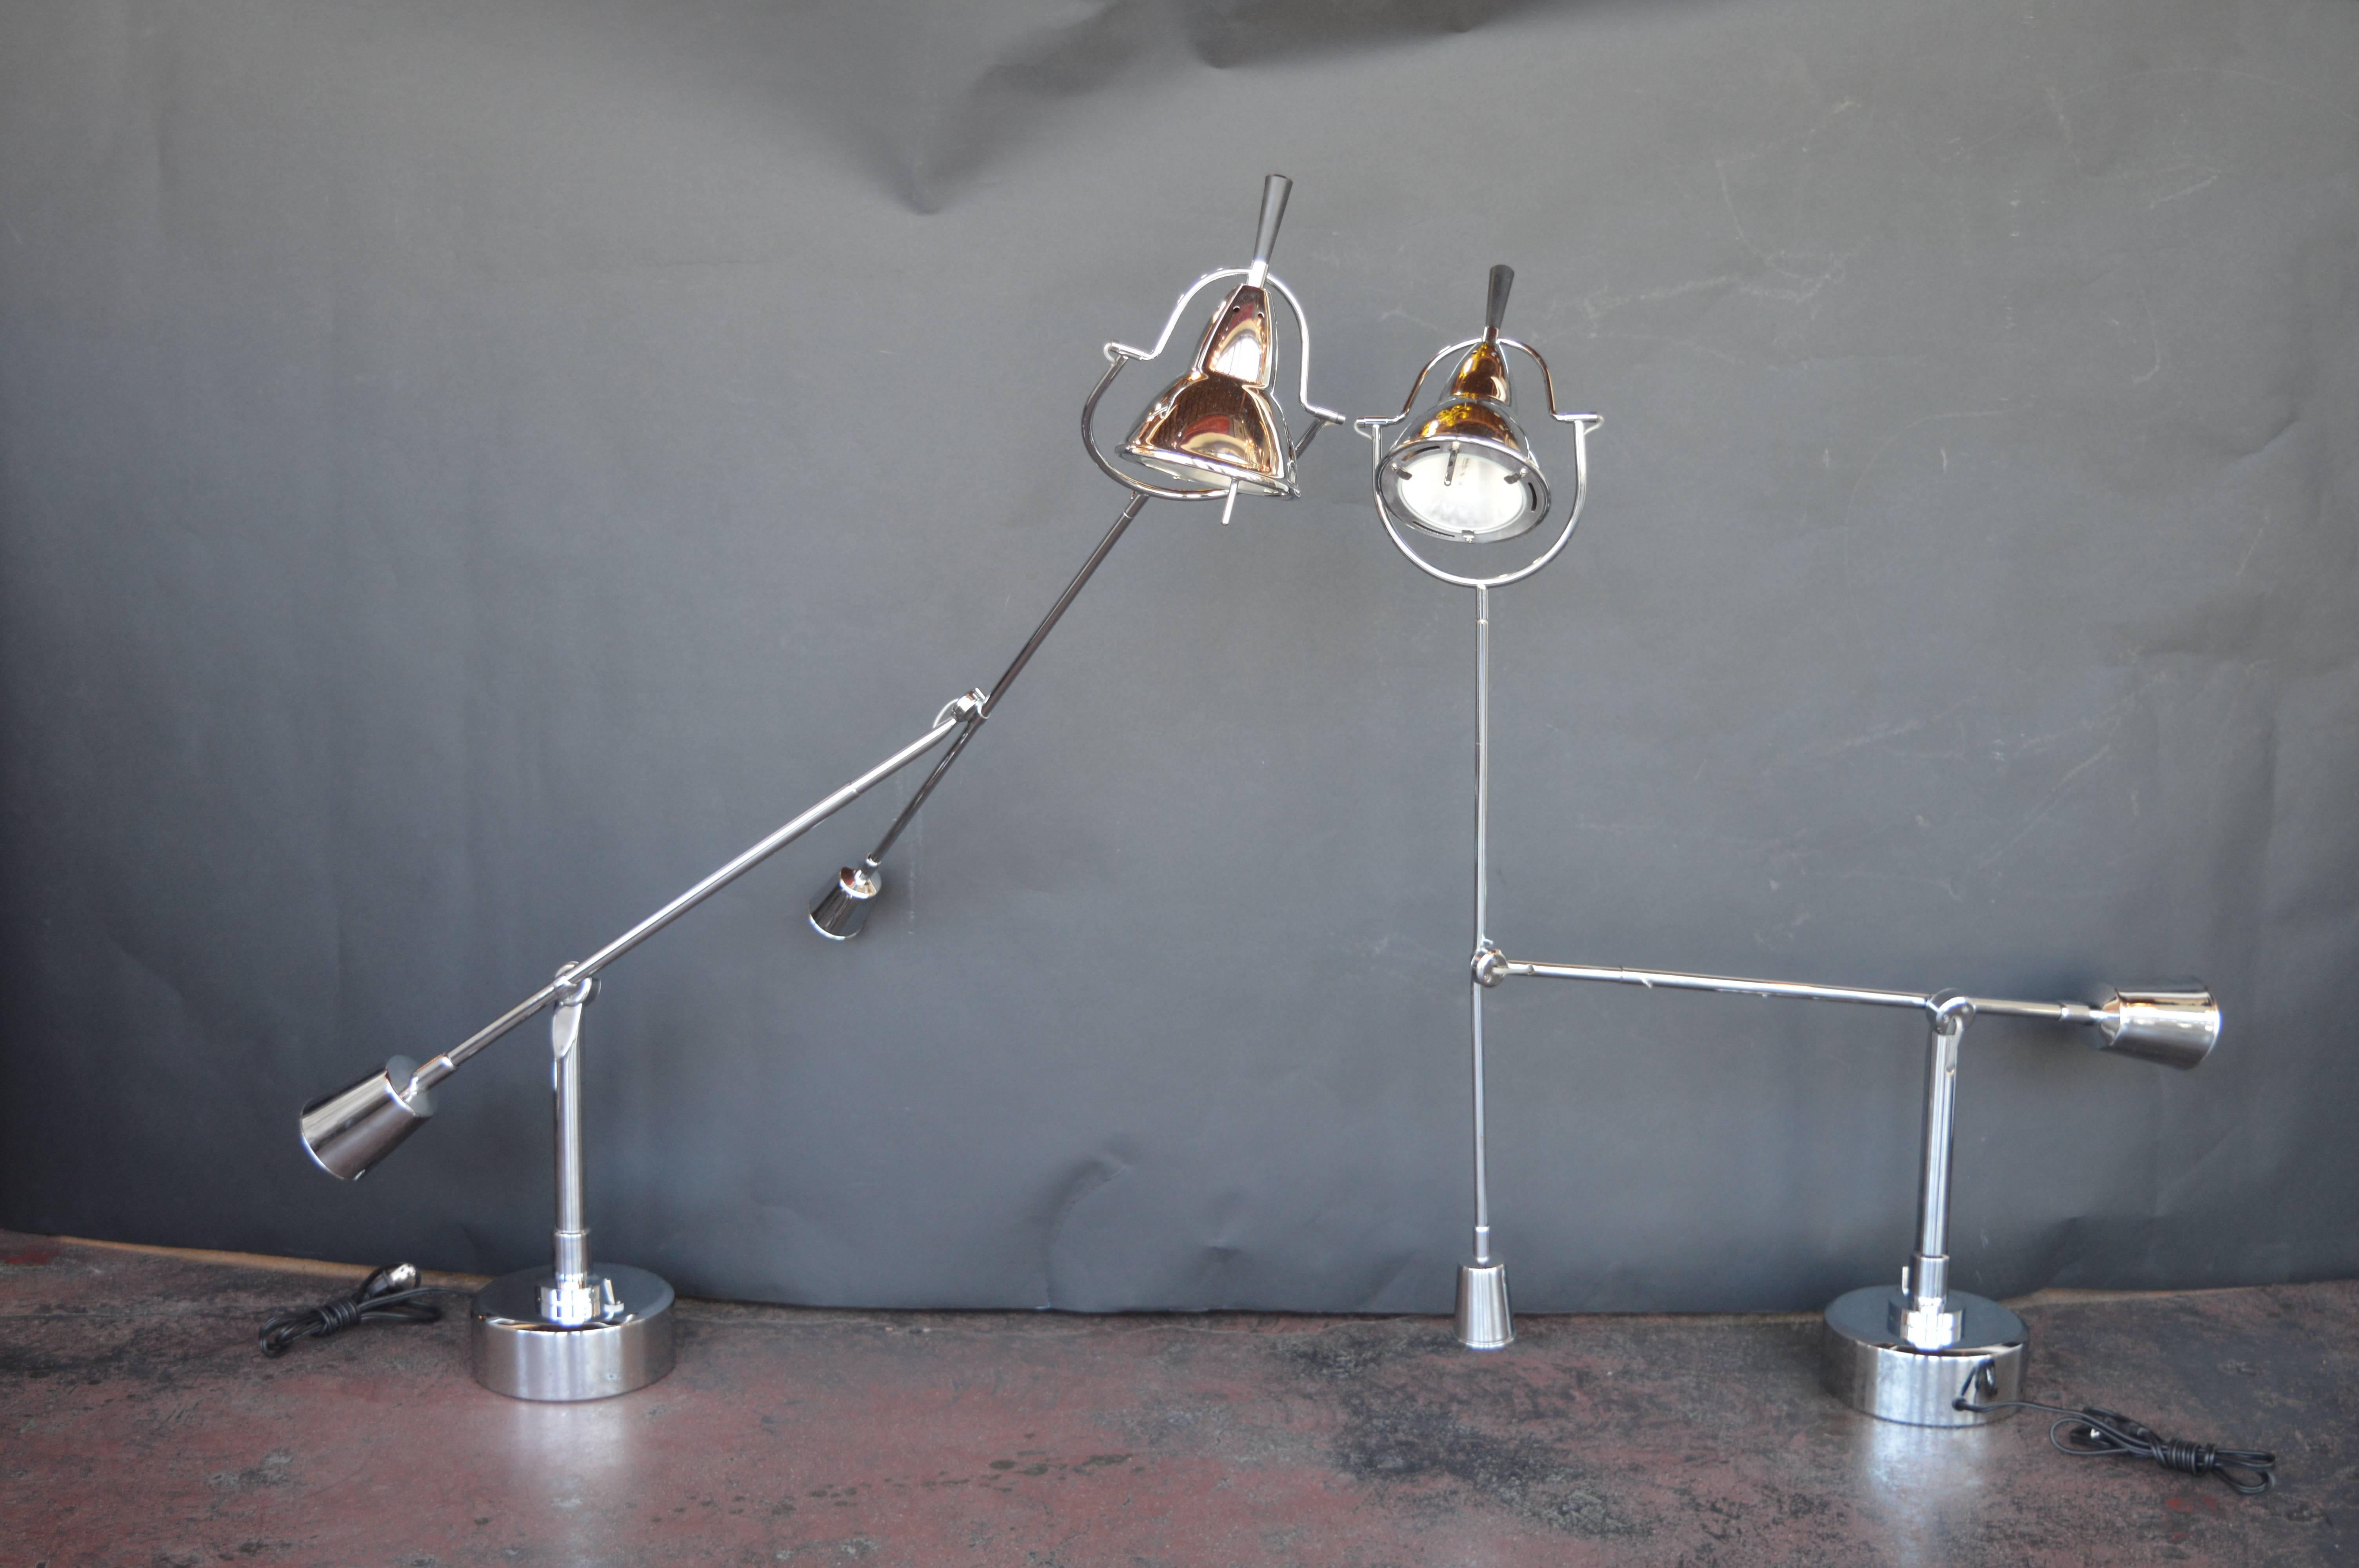 Pair of hinged chrome modern lamps. The lamps can be moved in any direction, they have great height but can also be lowered to be accommodating.